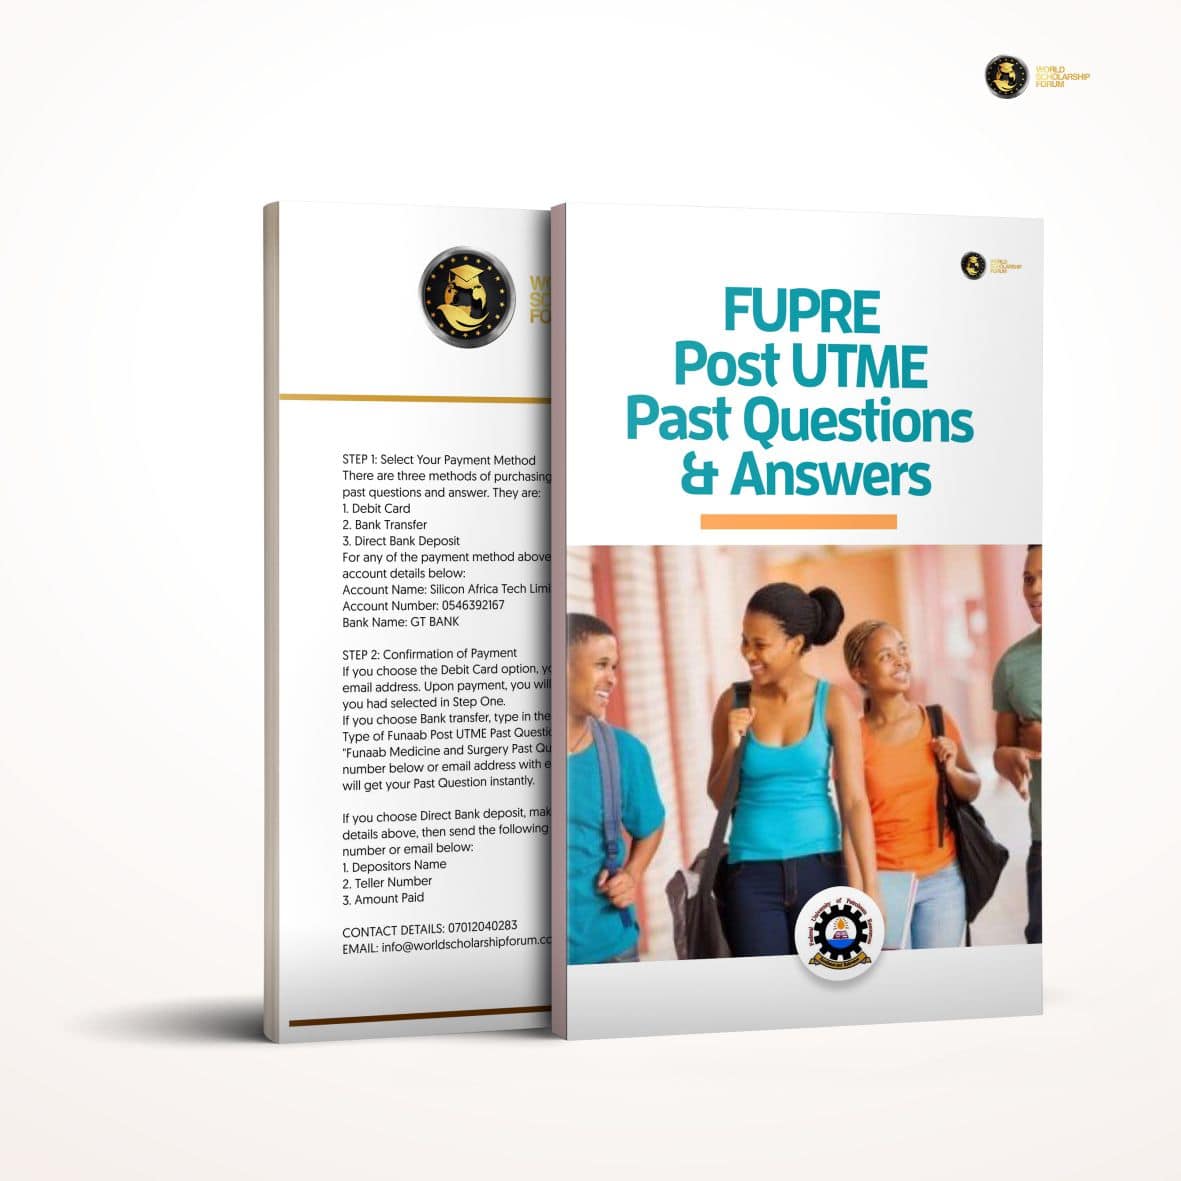 fupre-post-utme-past-questions-answers